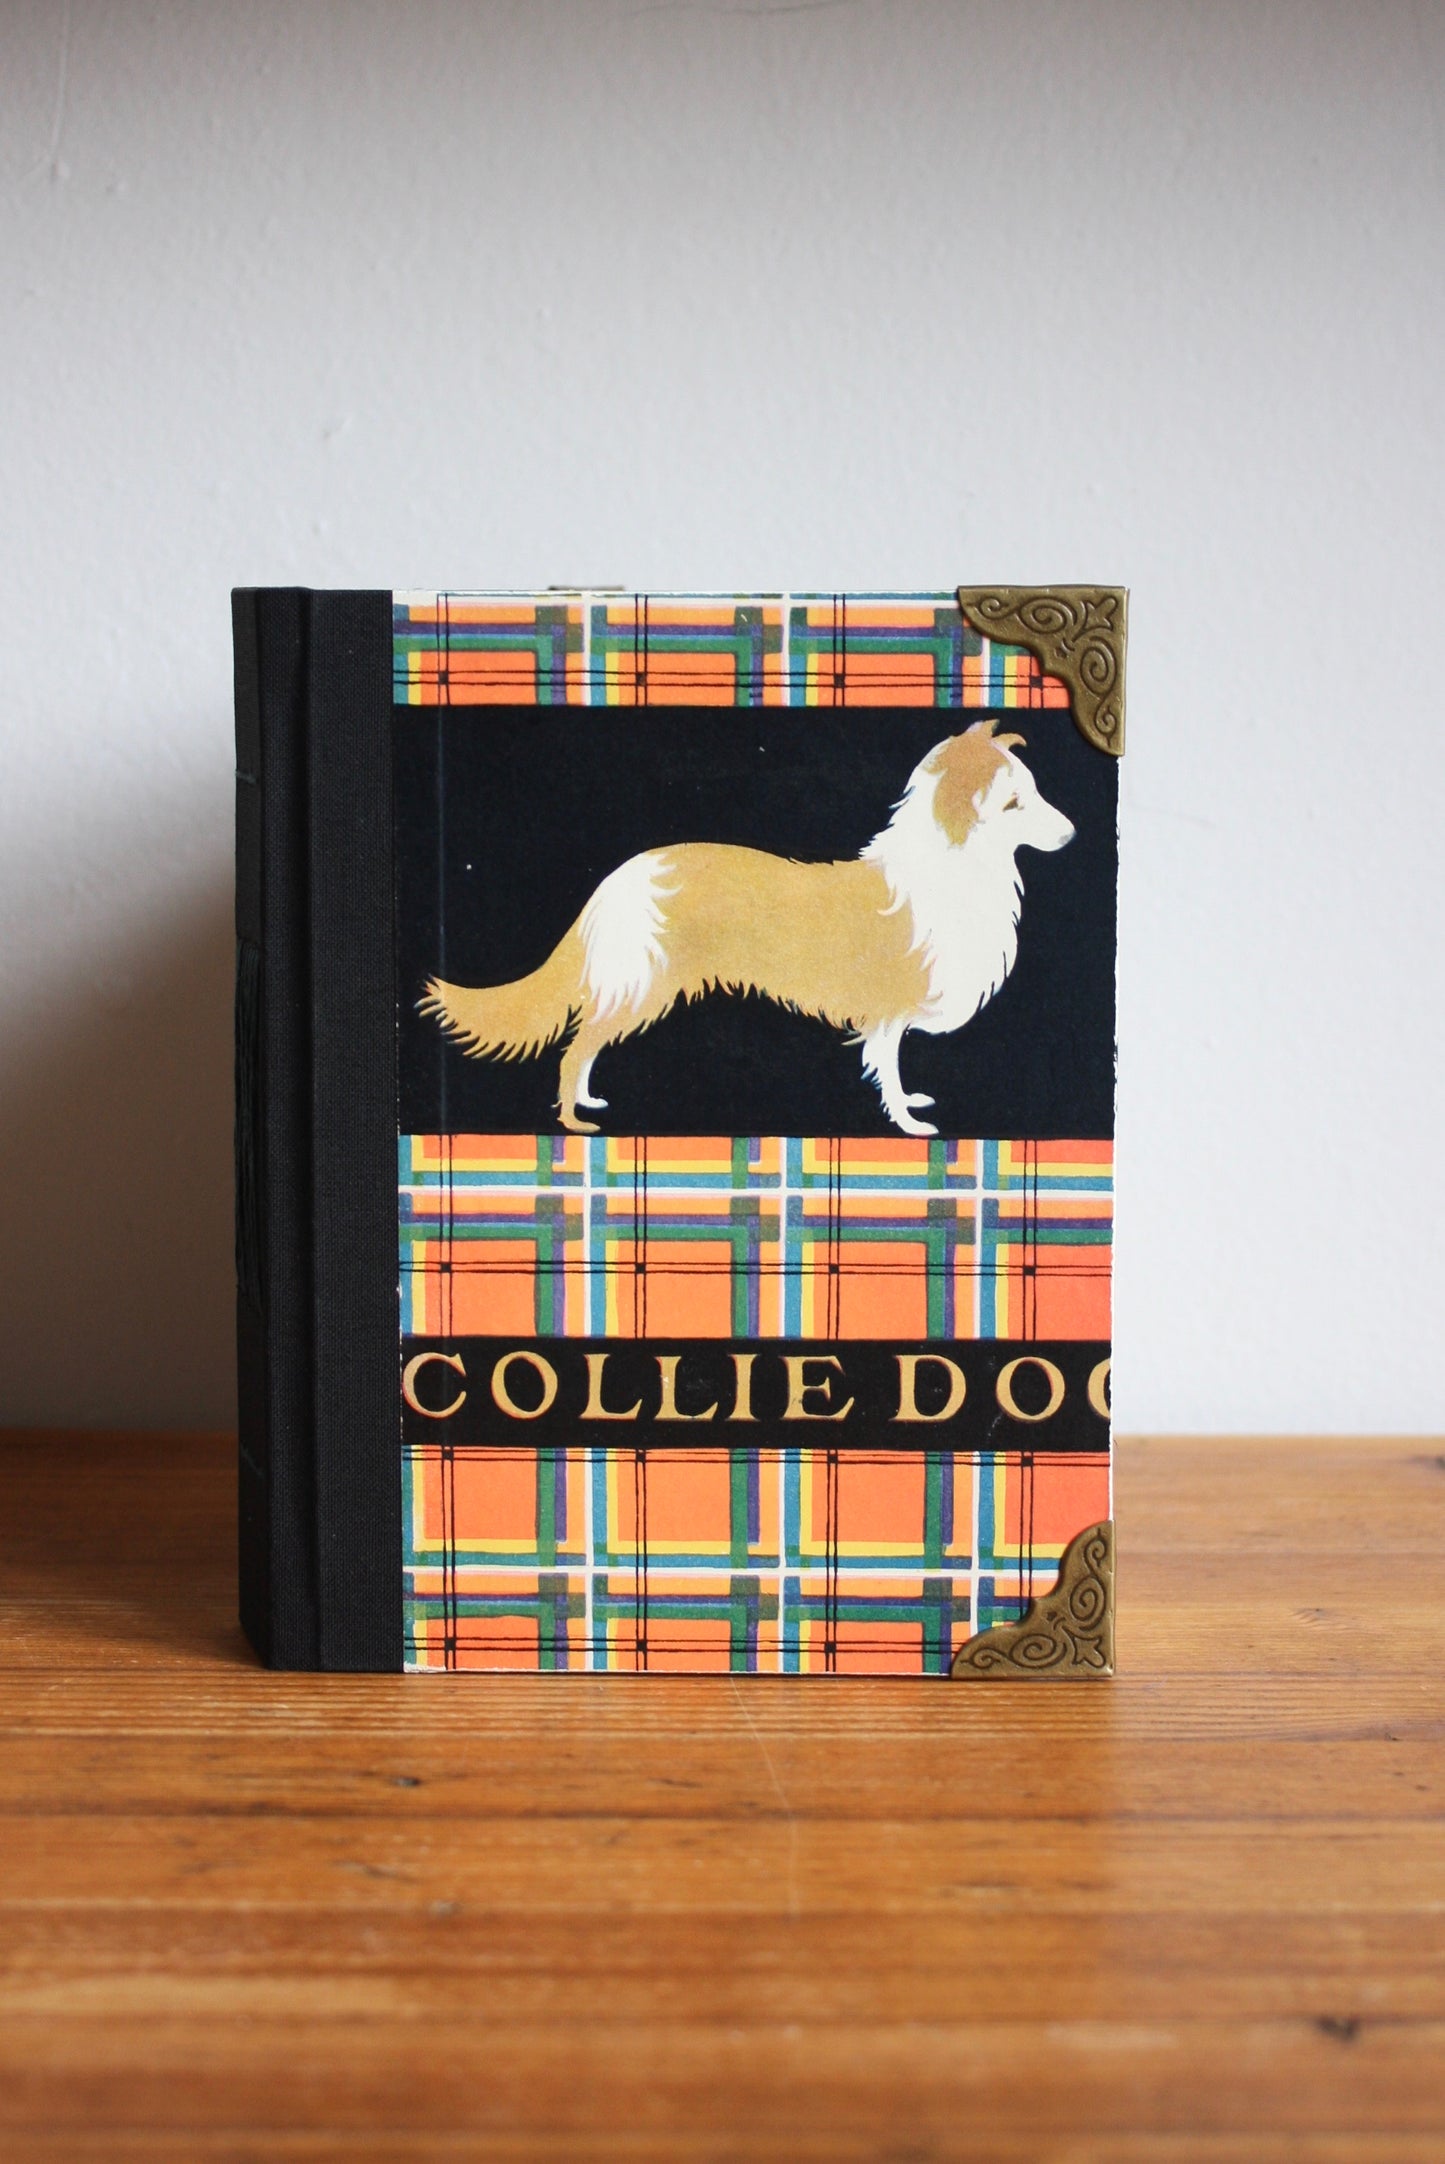 THE COLLIE DOG